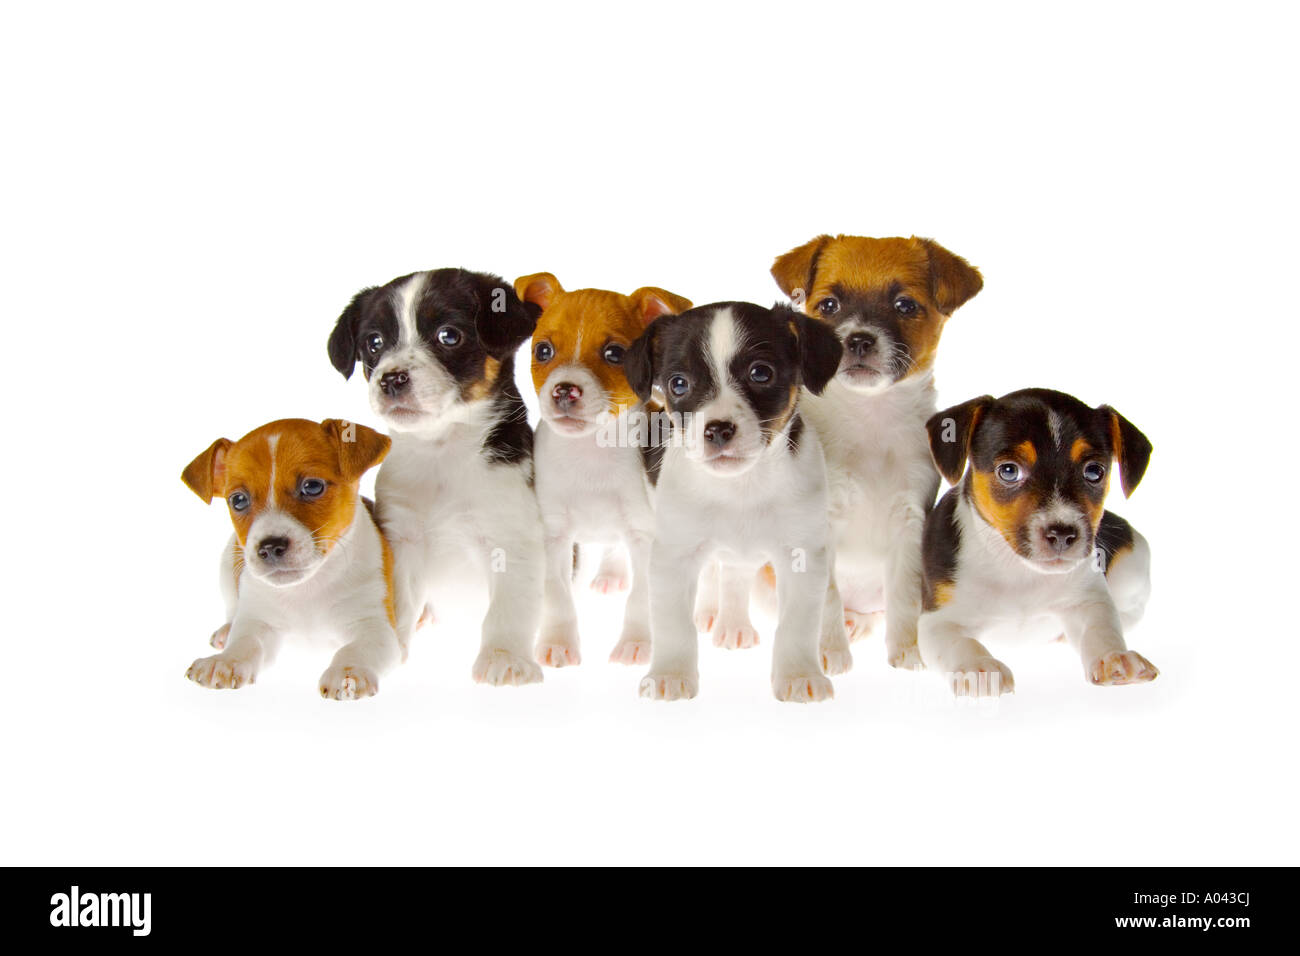 Group of 6 seven week old Jack Russell Terrier puppies on white background sitting and squatting on floor. JMH1982 Stock Photo